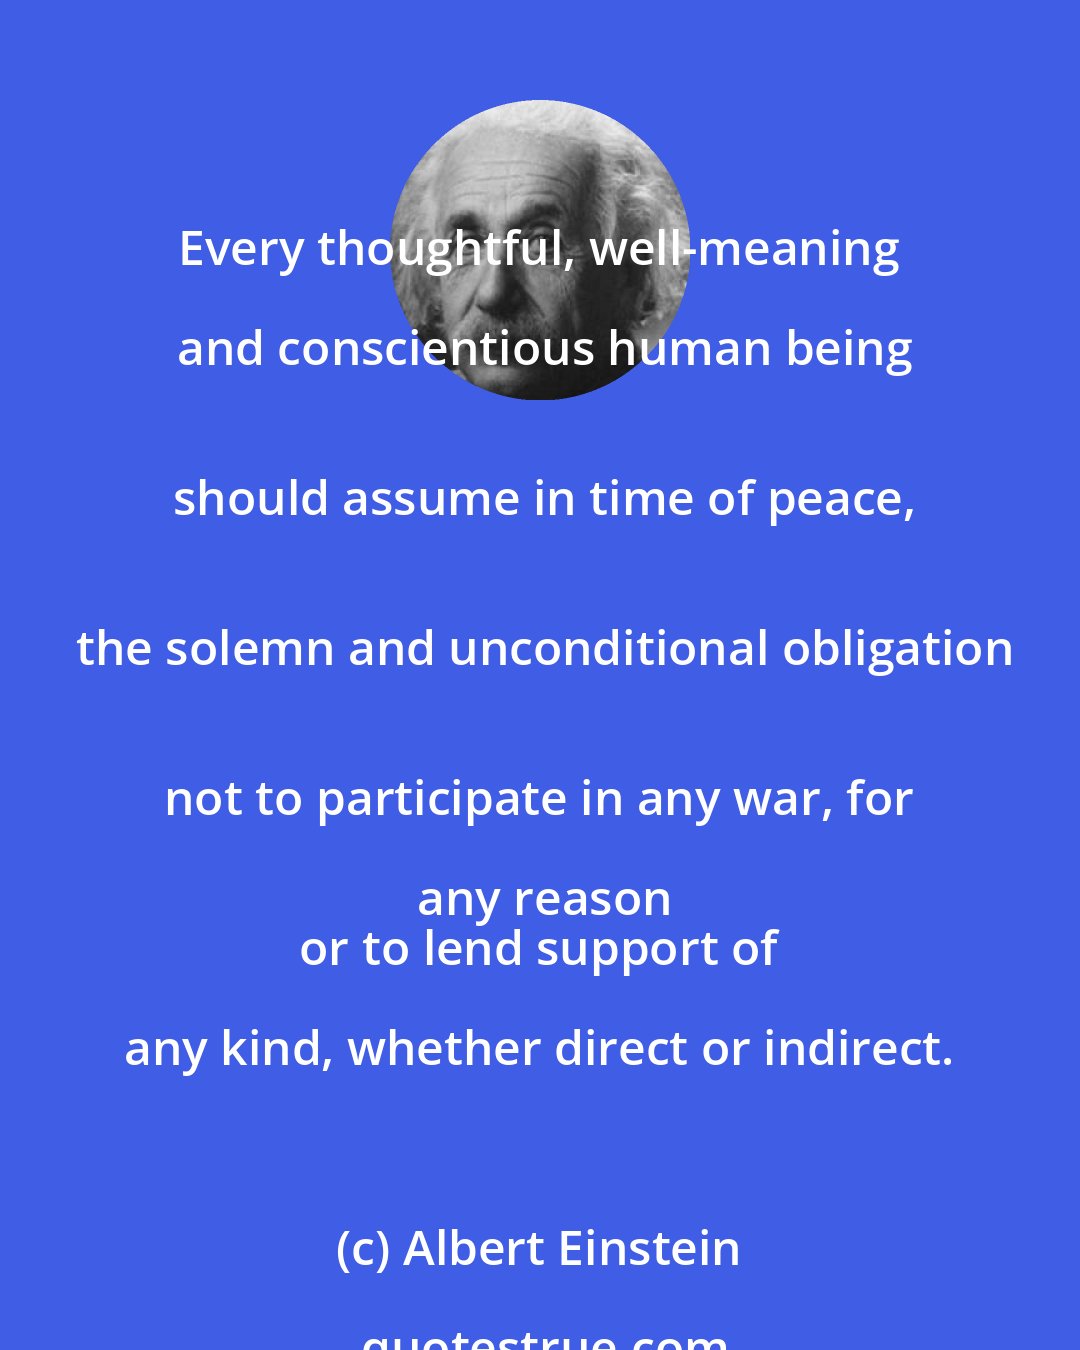 Albert Einstein: Every thoughtful, well-meaning and conscientious human being
 should assume in time of peace,
 the solemn and unconditional obligation
 not to participate in any war, for any reason
 or to lend support of any kind, whether direct or indirect.